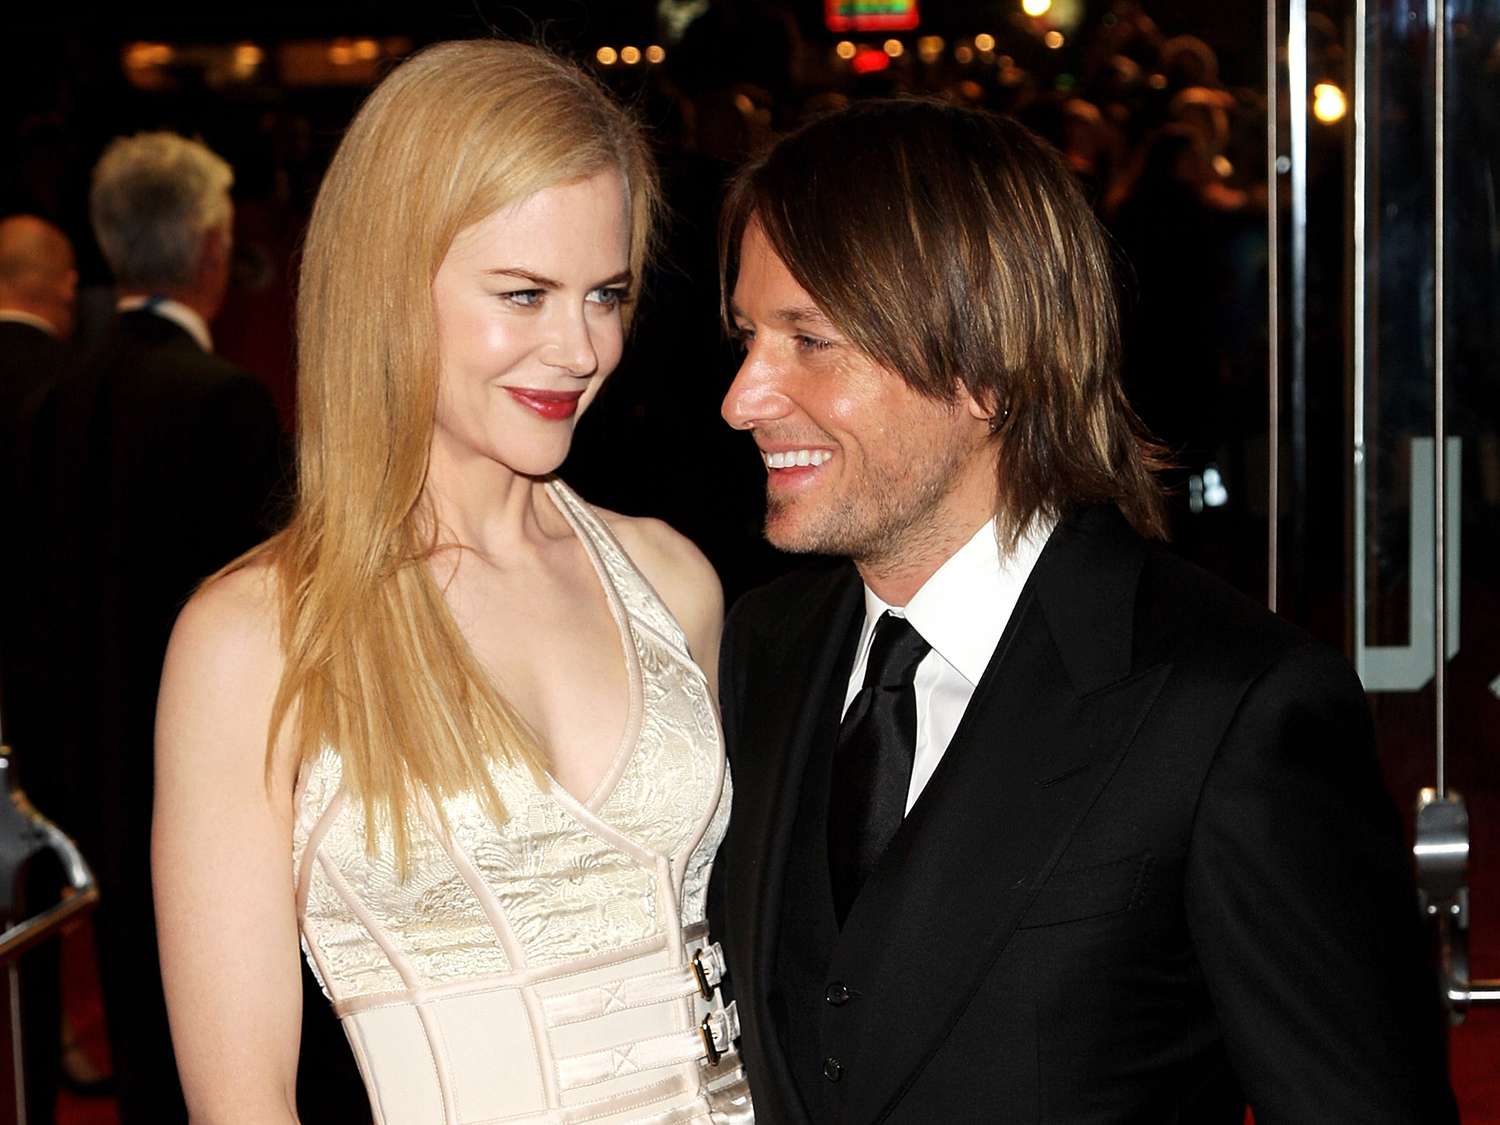 Nicole Kidman and her husband, musician Keith Urban, arrive at the world premiere of "The Golden Compass" at the Odeon Leicester Square on November 27, 2007 in London, England